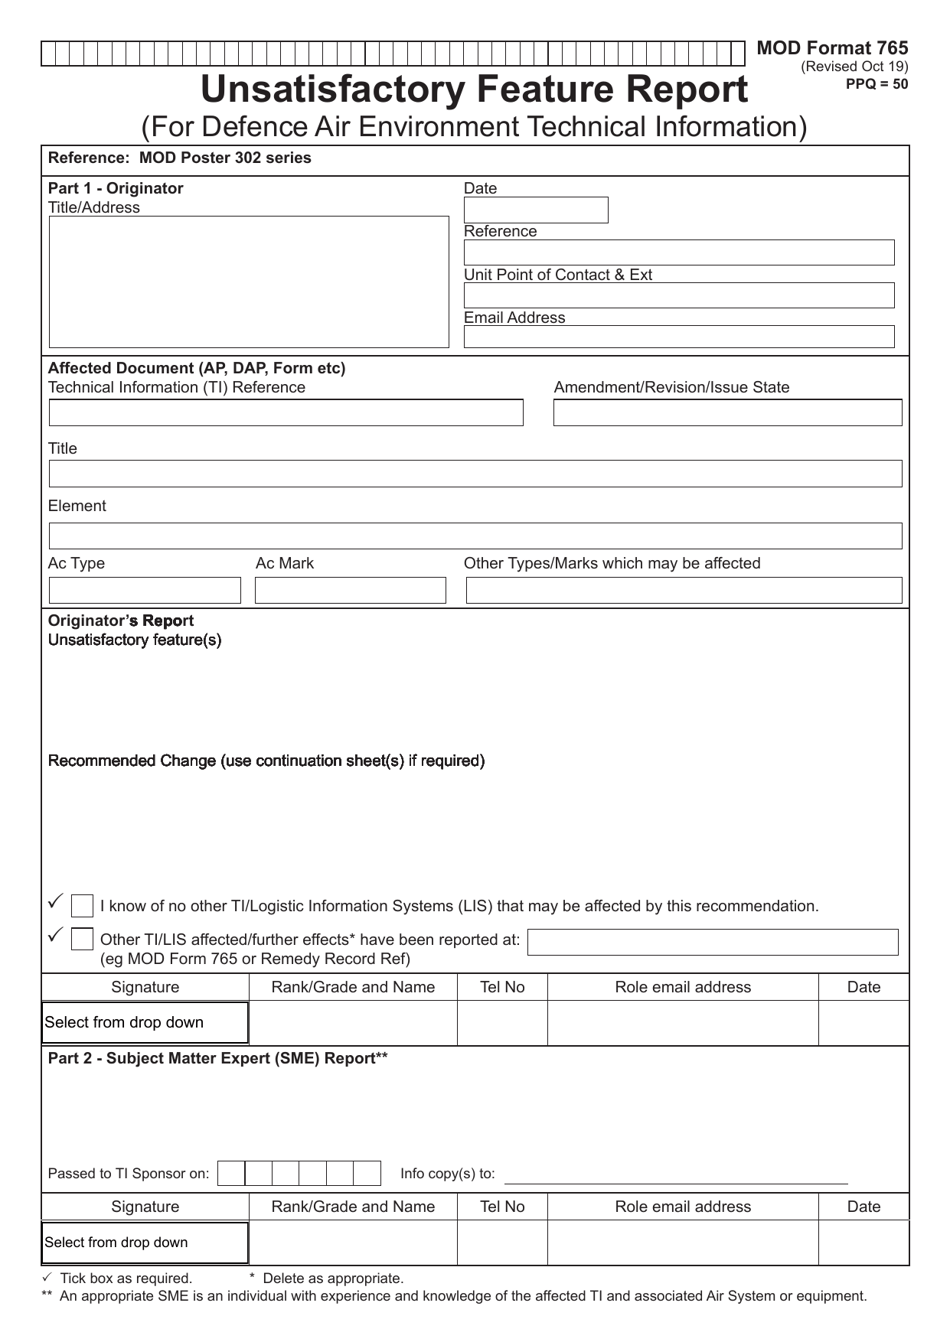 MOD Form 765 Unsatisfactory Feature Report (For Defence Air Environment Technical Information) - United Kingdom, Page 1